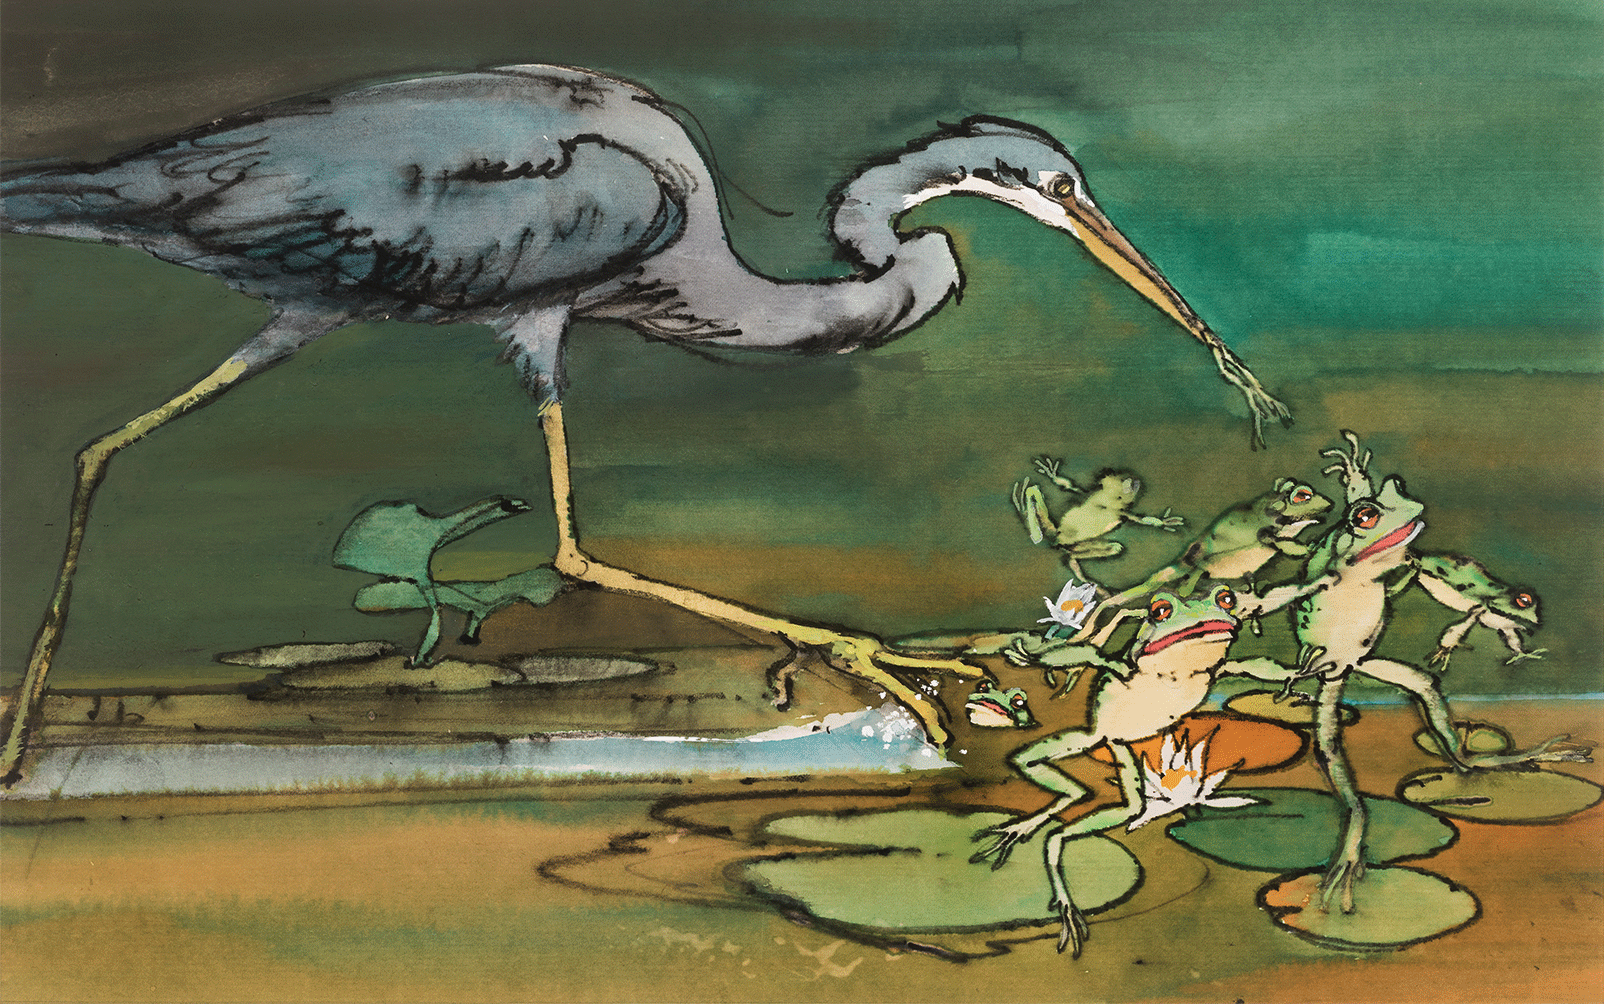 The Frog And The Pelican by Des O'Brien